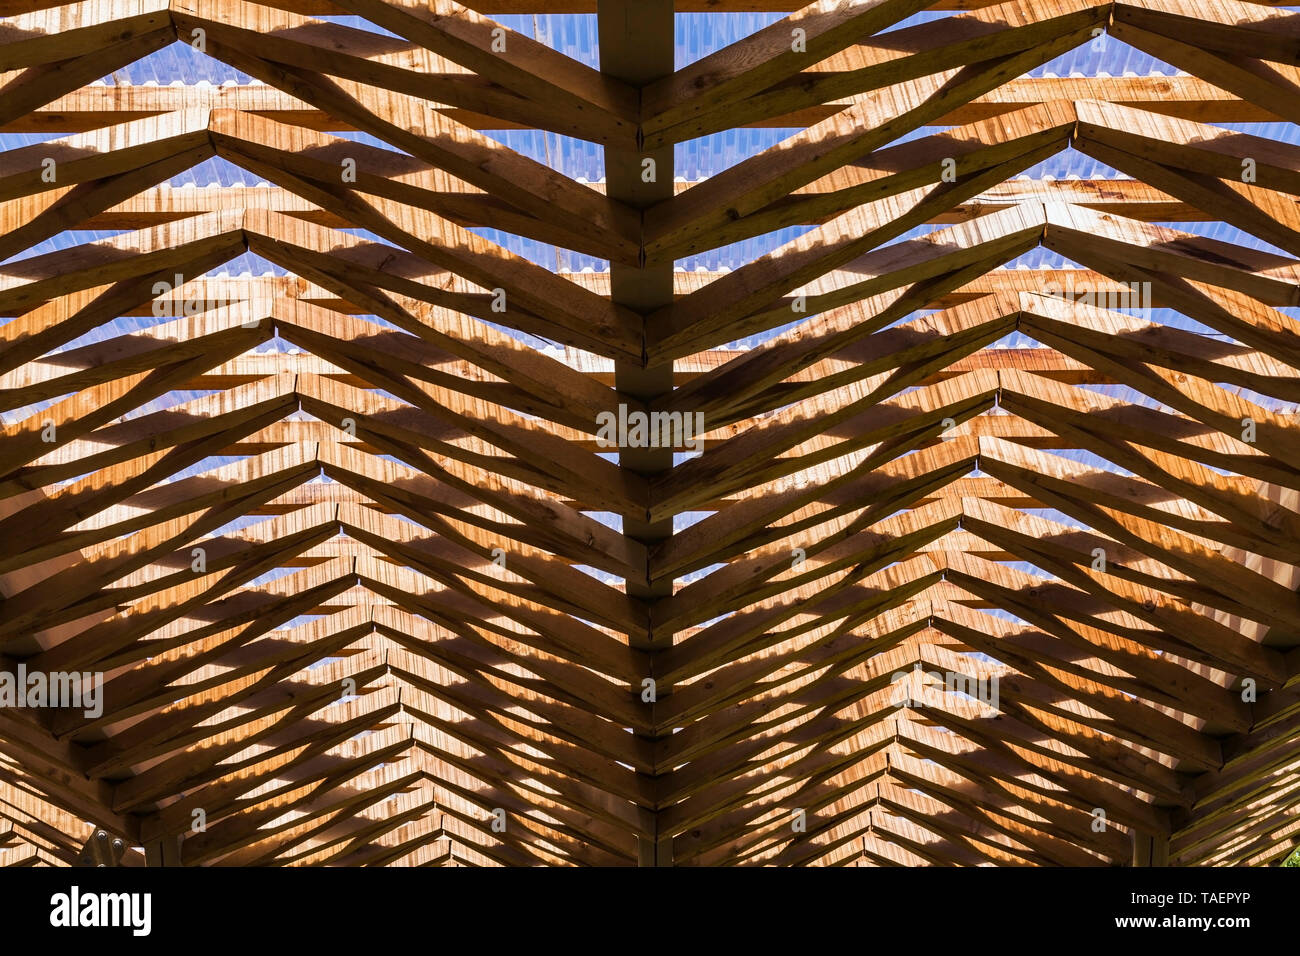 Underside view of transparent corrugated fibreglass roof sheeting and wooden joist framework, Montreal, Quebec, Canada Stock Photo